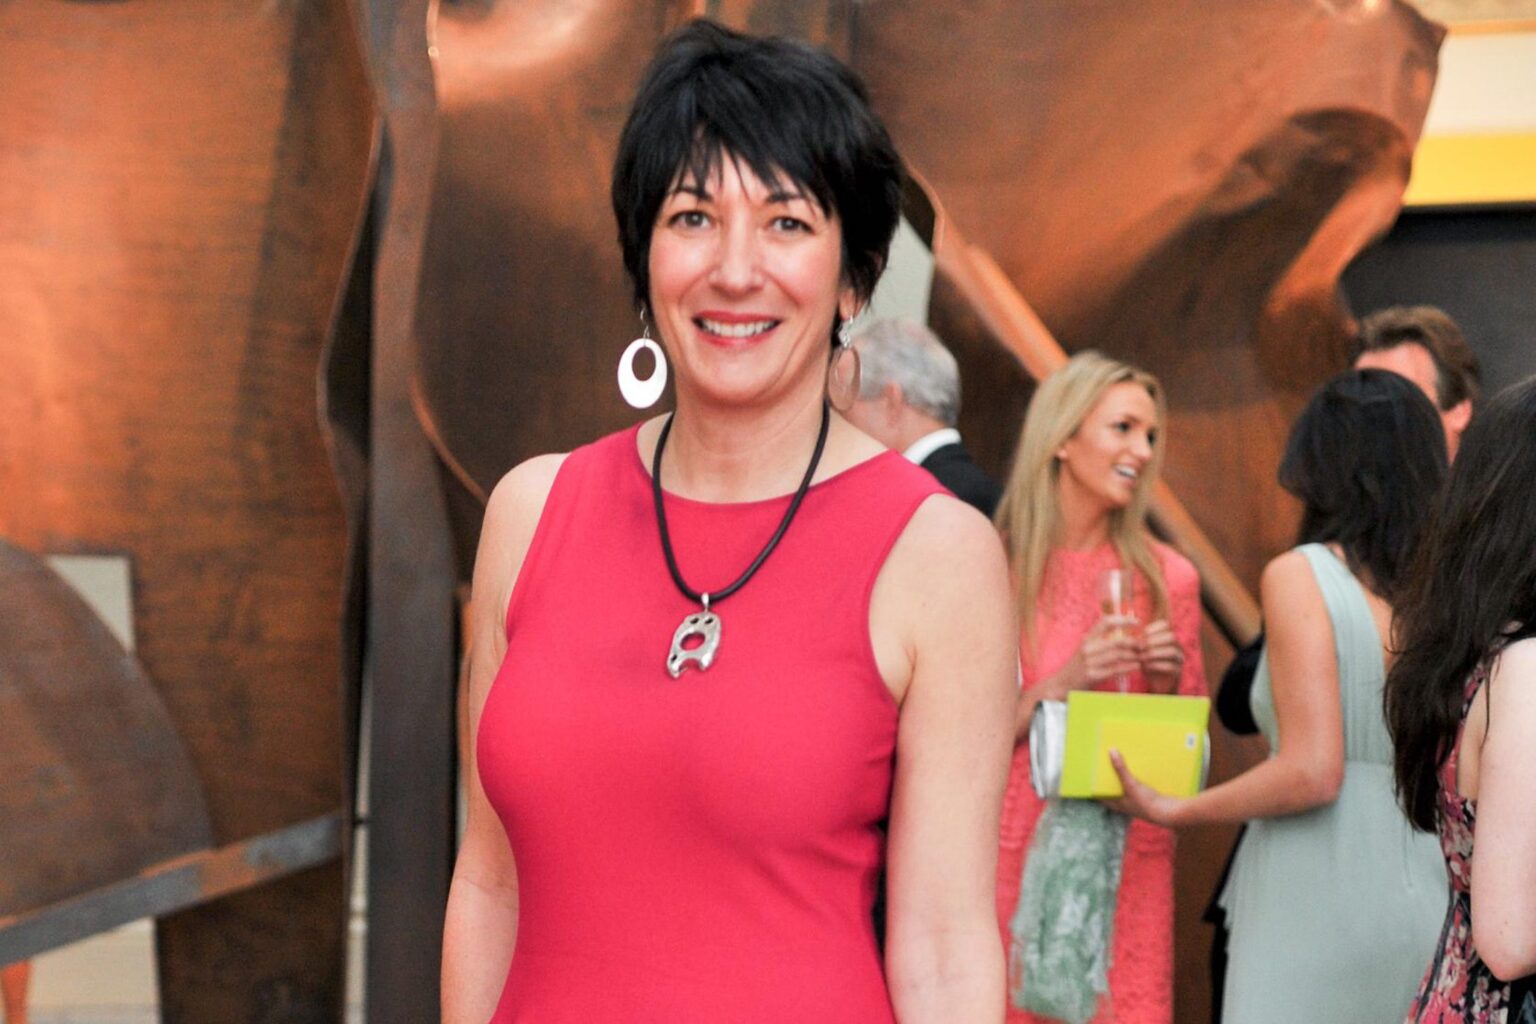 Ghislaine Maxwell has said she is willing to cooperate with authorities. Here's everything it means for Jeffrey Epstein and his accomplices.